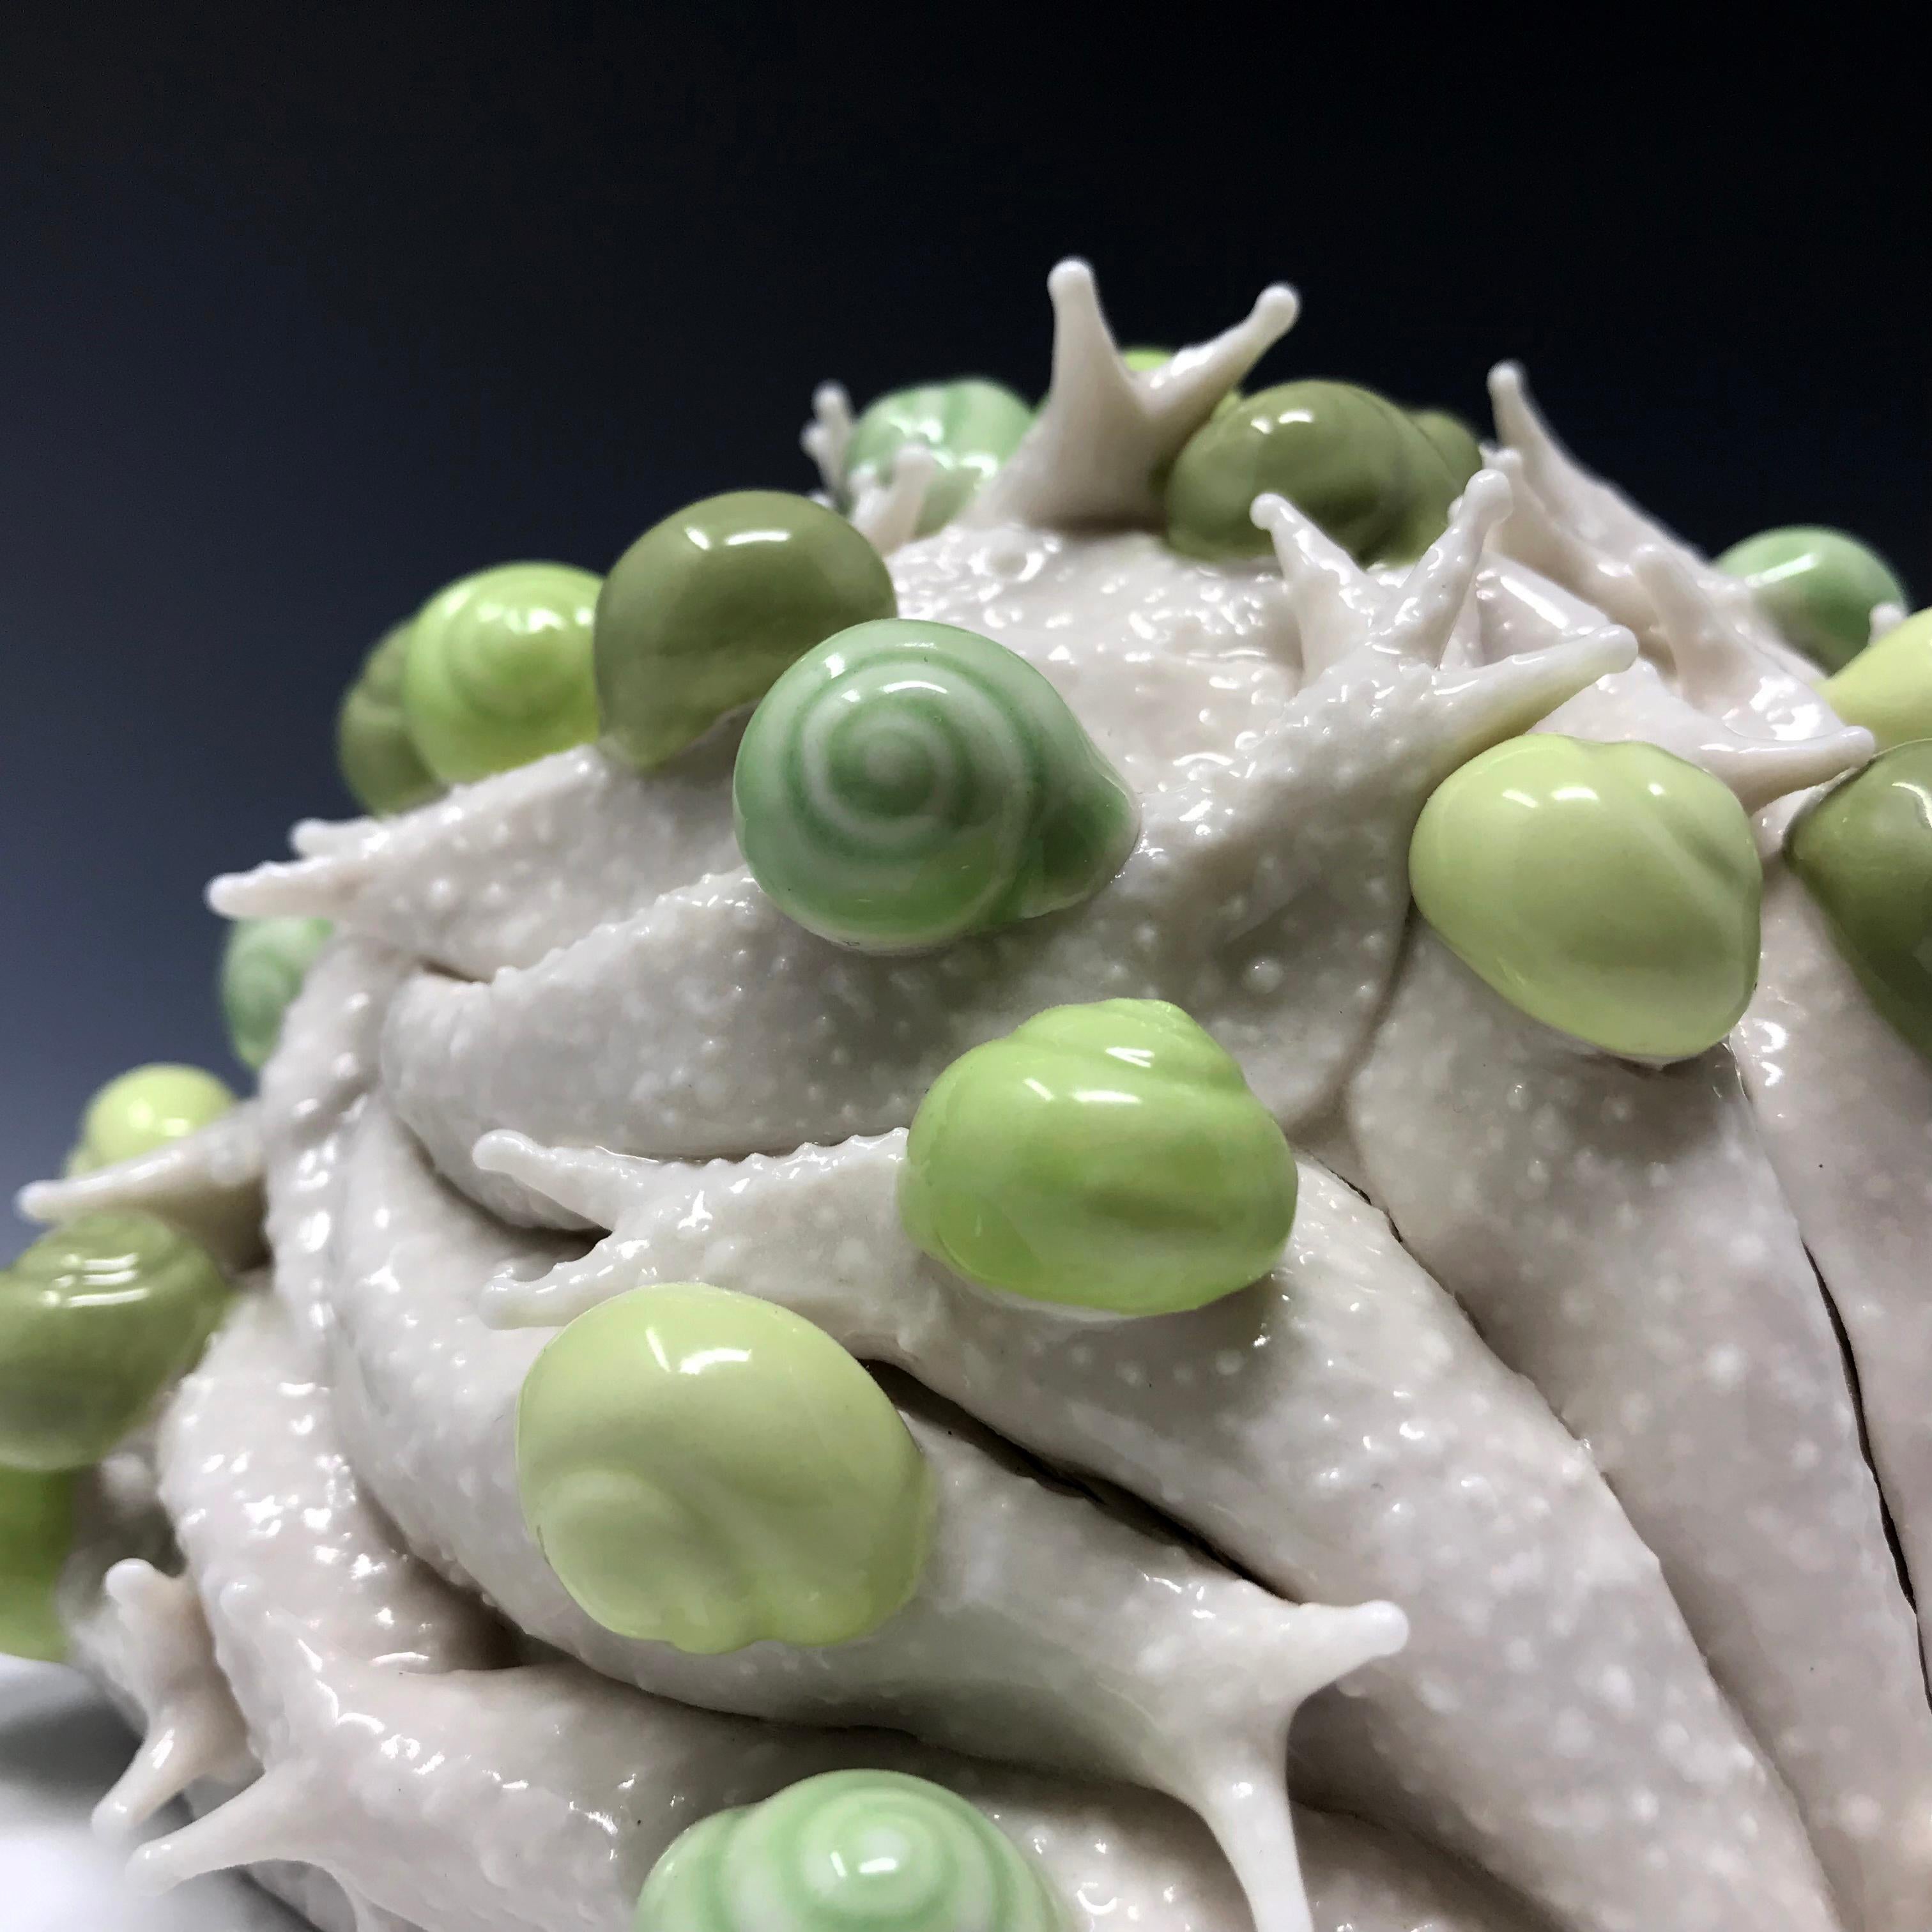 Porcelain Snail Pile in Green - Sculpture by Bethany Krull